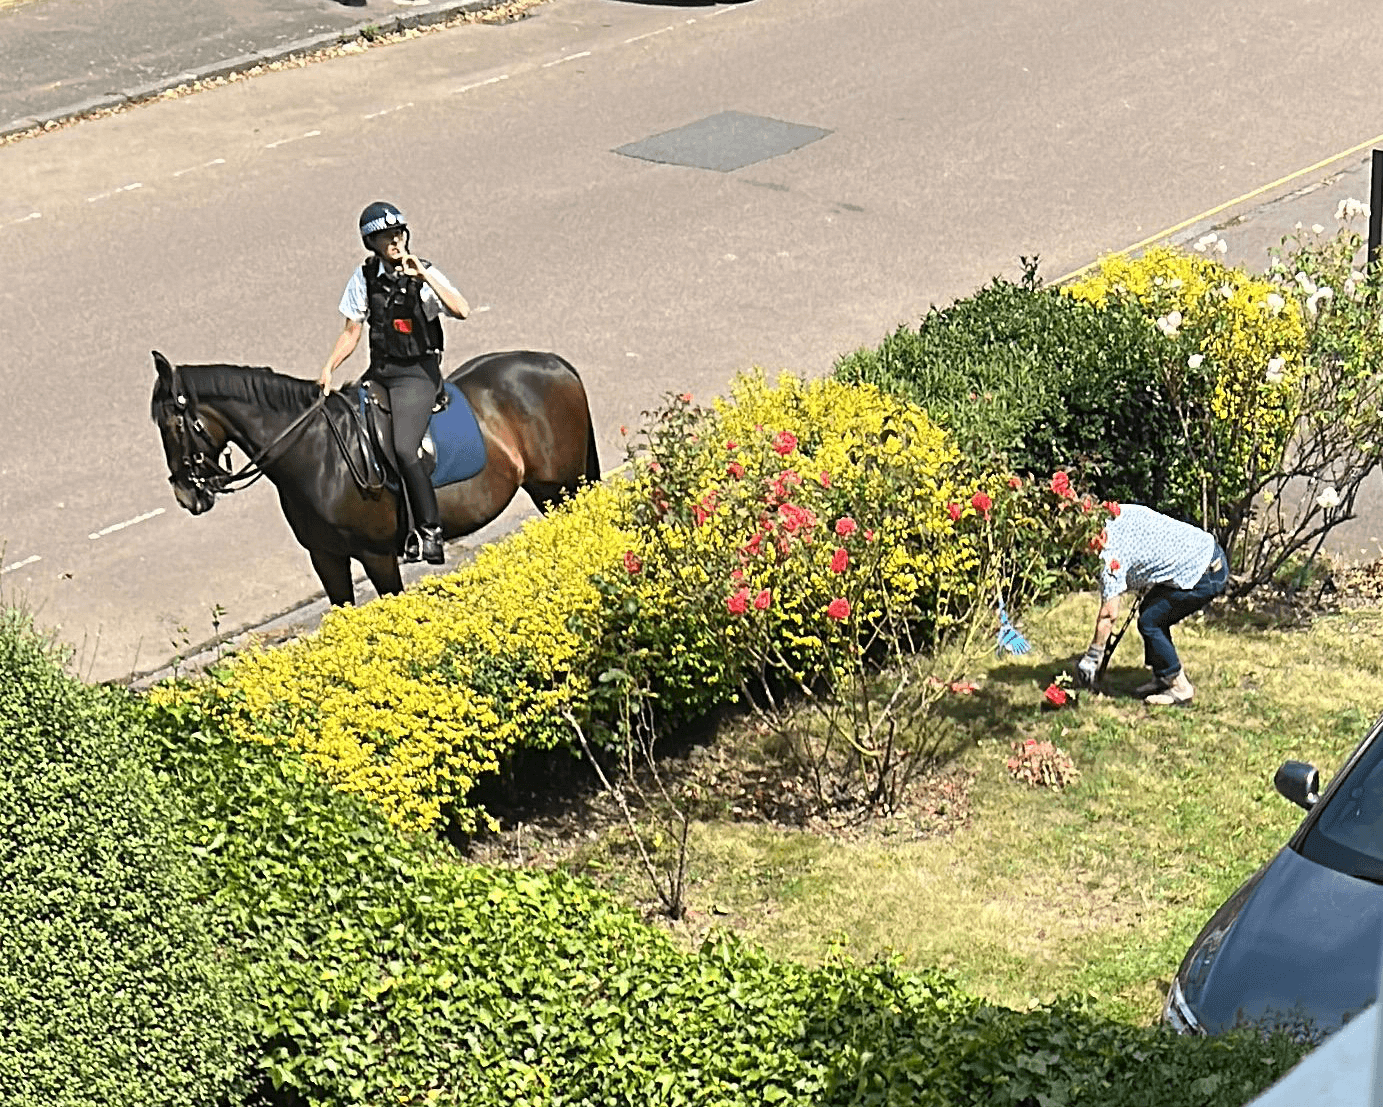 crouching woman in garden shot from above, police woman on police horse in street looking in